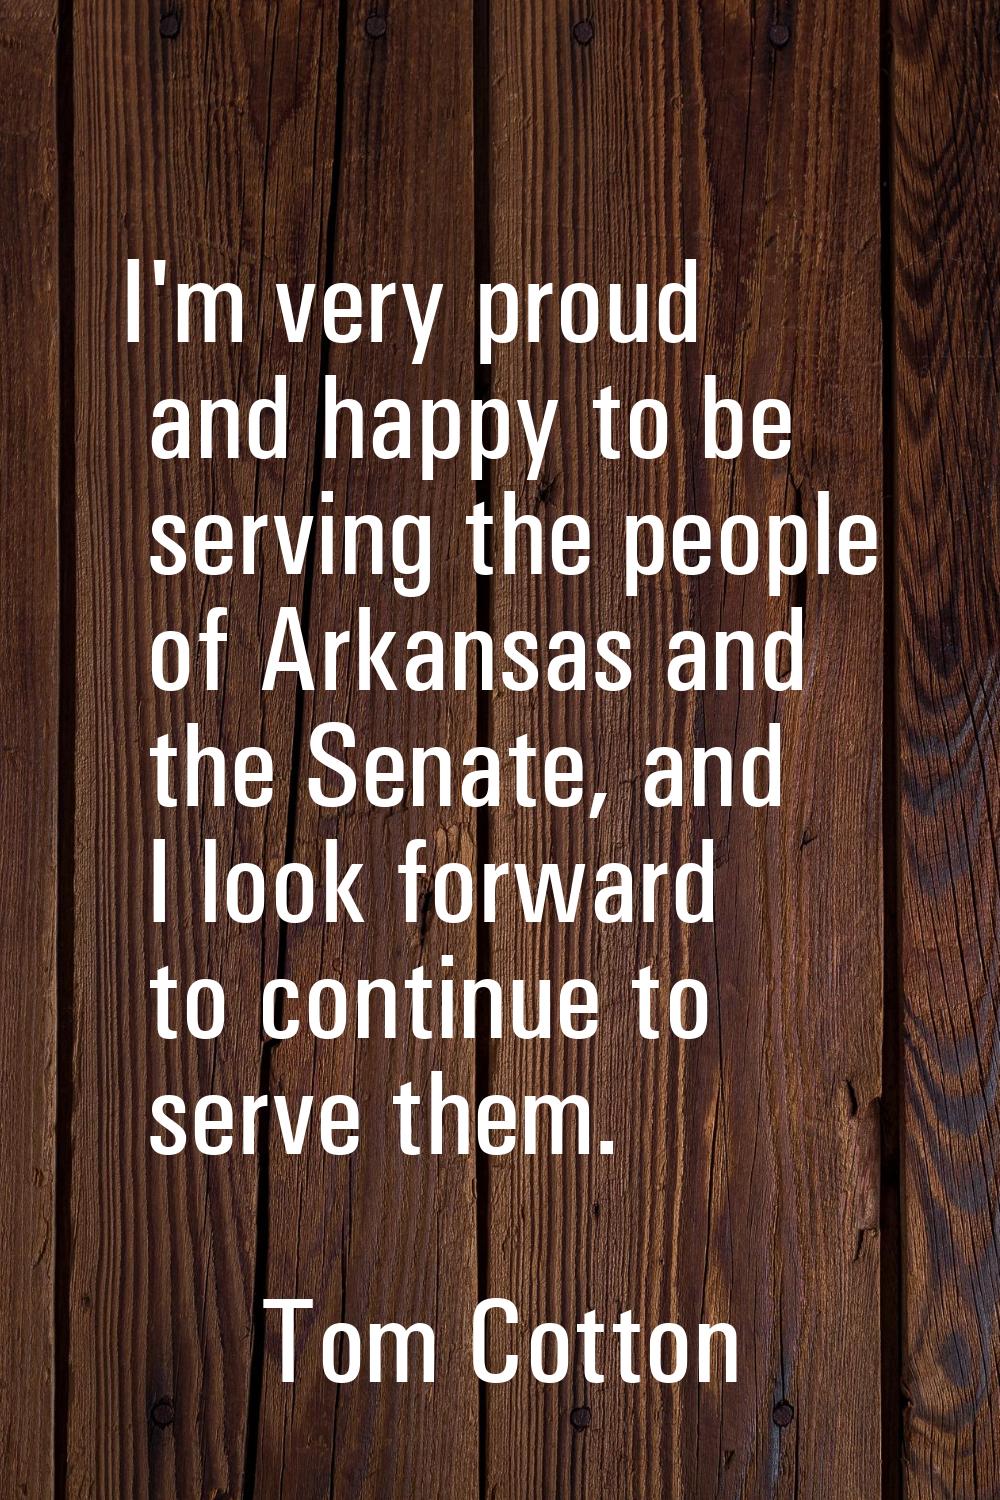 I'm very proud and happy to be serving the people of Arkansas and the Senate, and I look forward to